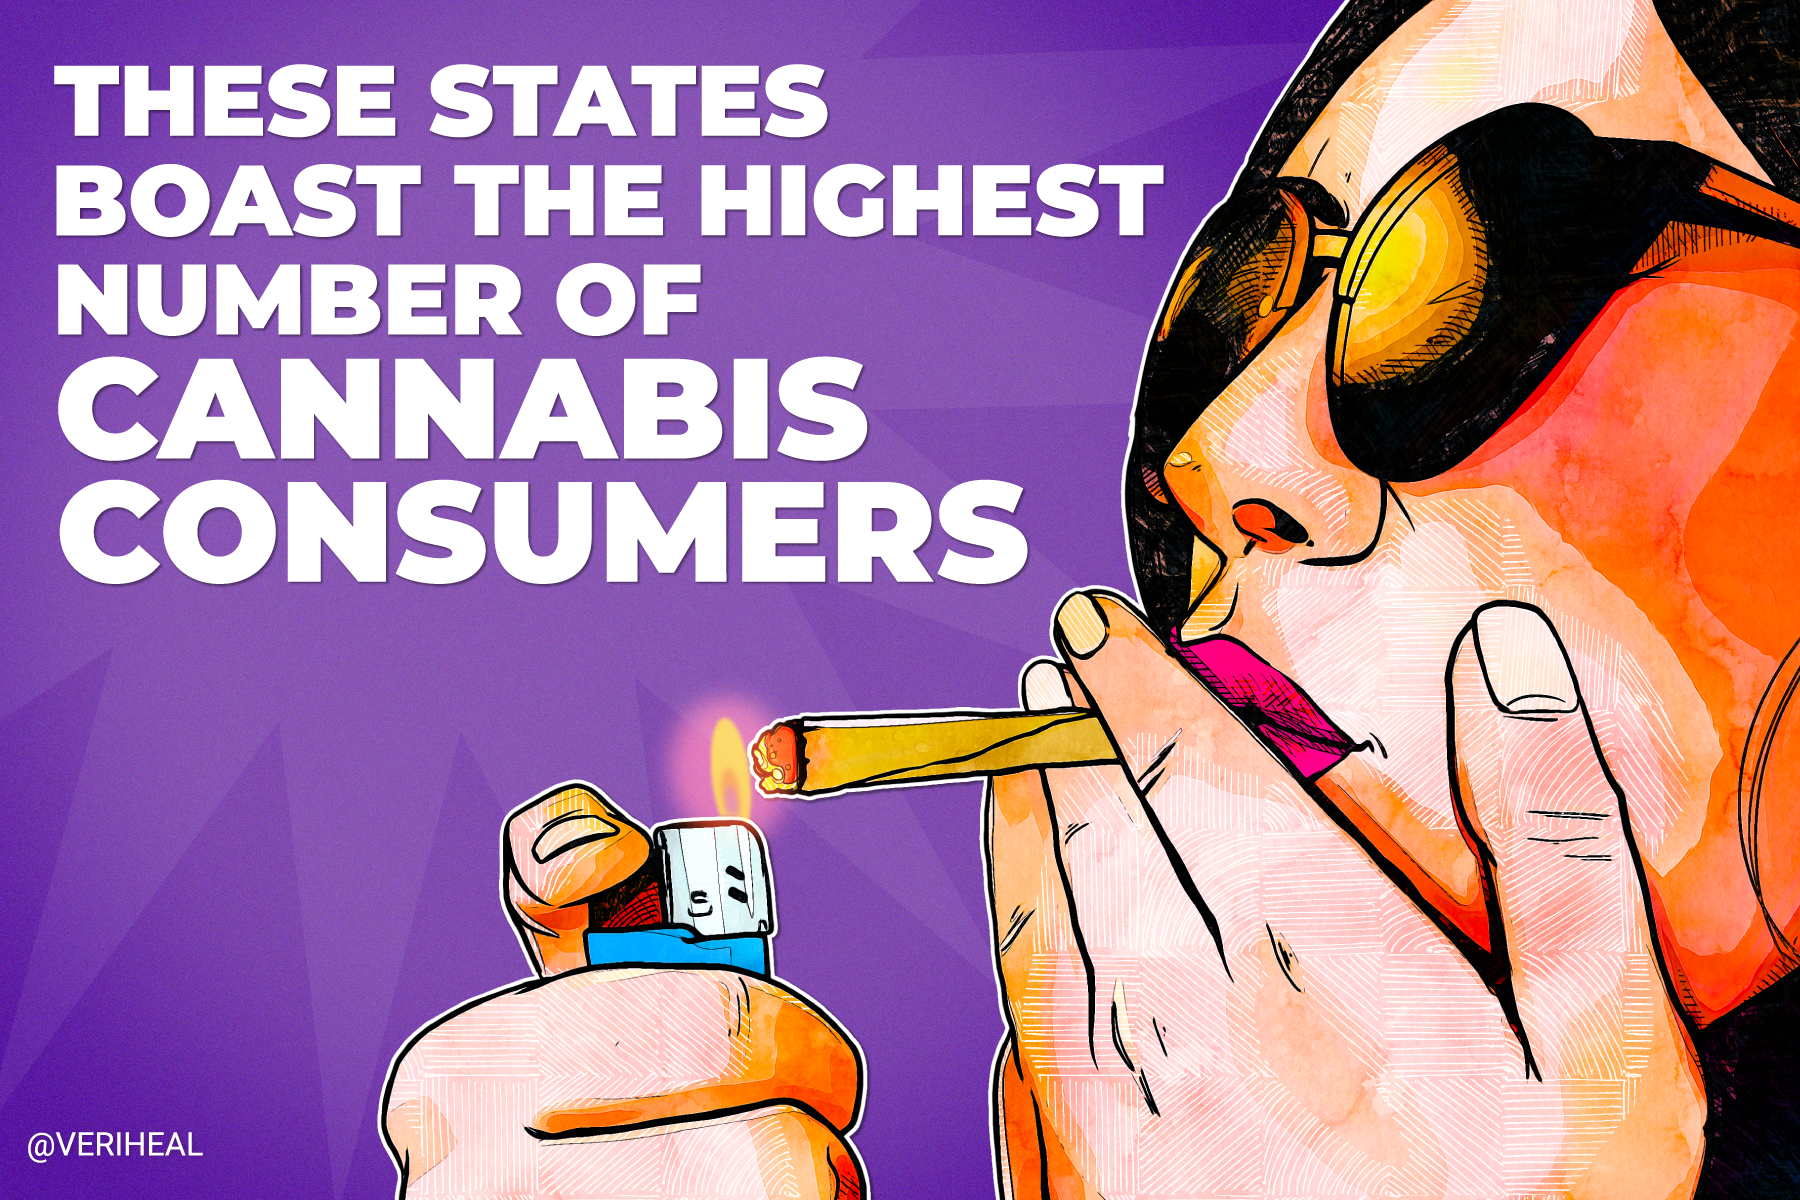 These U.S. States Boast the Highest Number of Cannabis Consumers